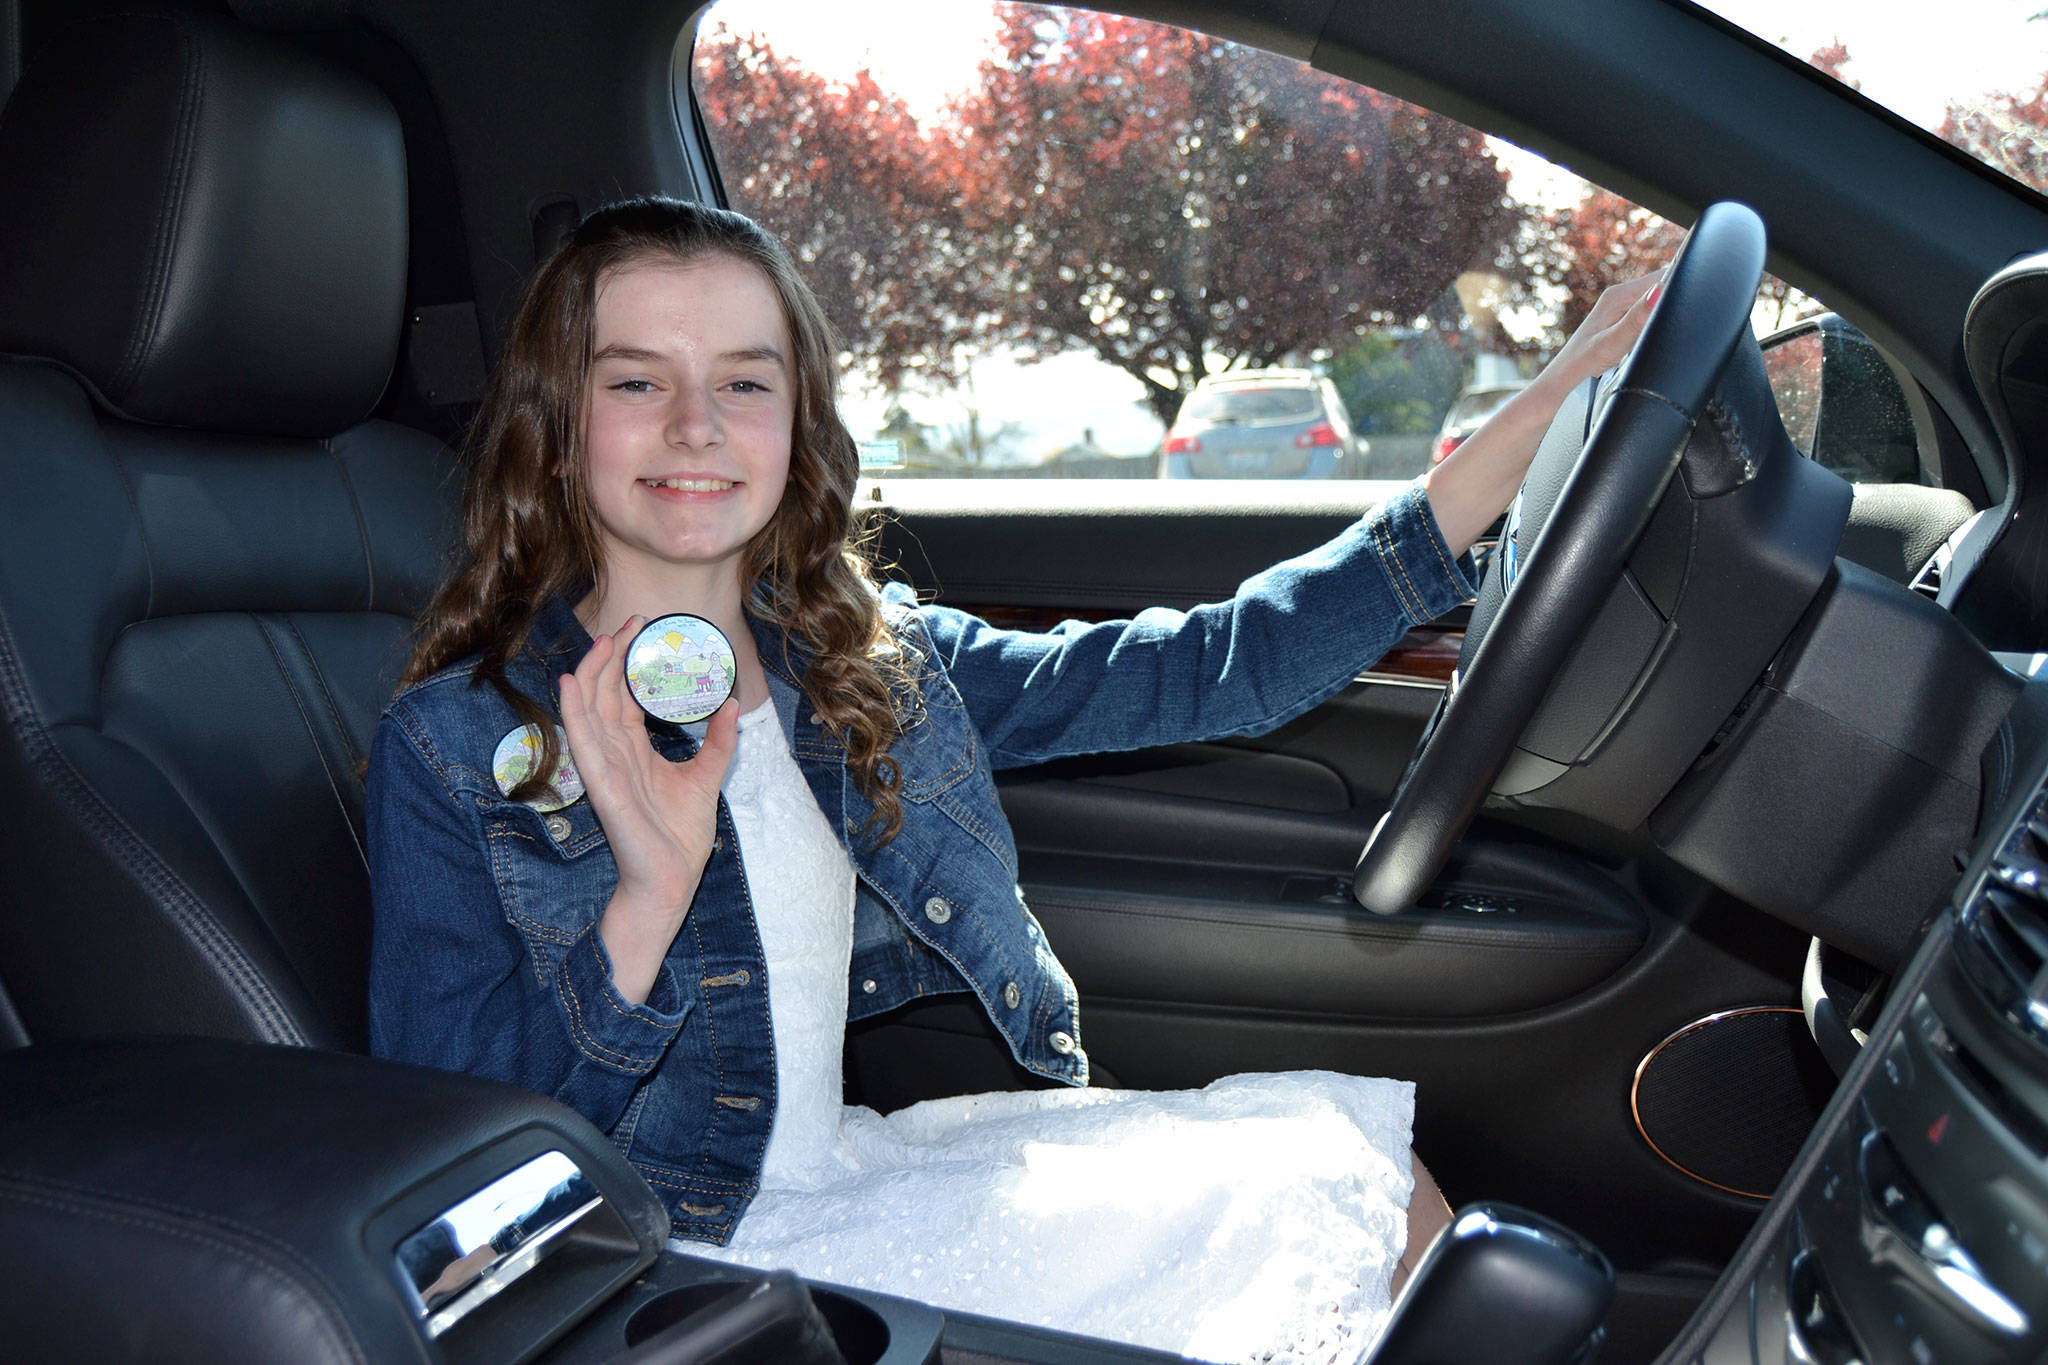 Sara German won this year’s Sequim Irrigation Festival button design contest and the chance to ride in a limo with friends to lunch on May 1. Sequim Gazette photo by Matthew Nash